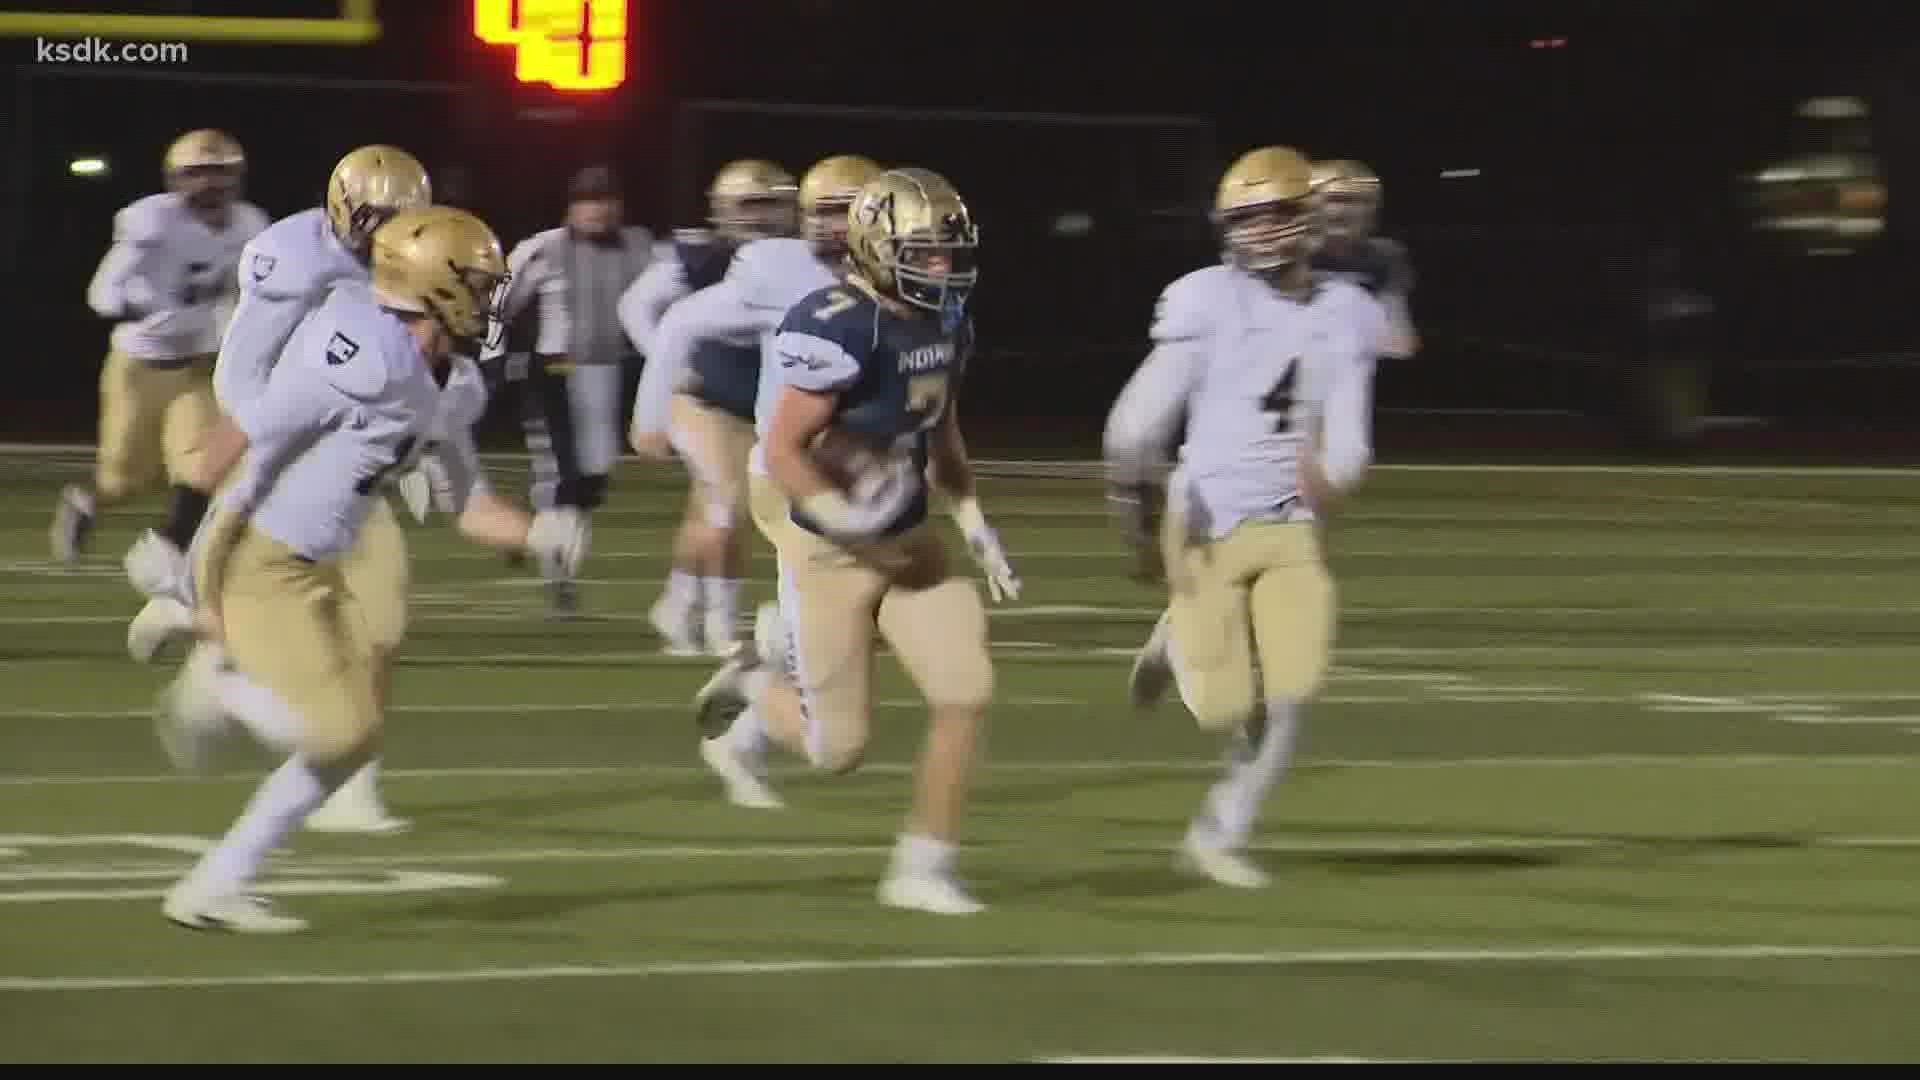 Holt kept rolling and got a big win over Helias. They're district champs.